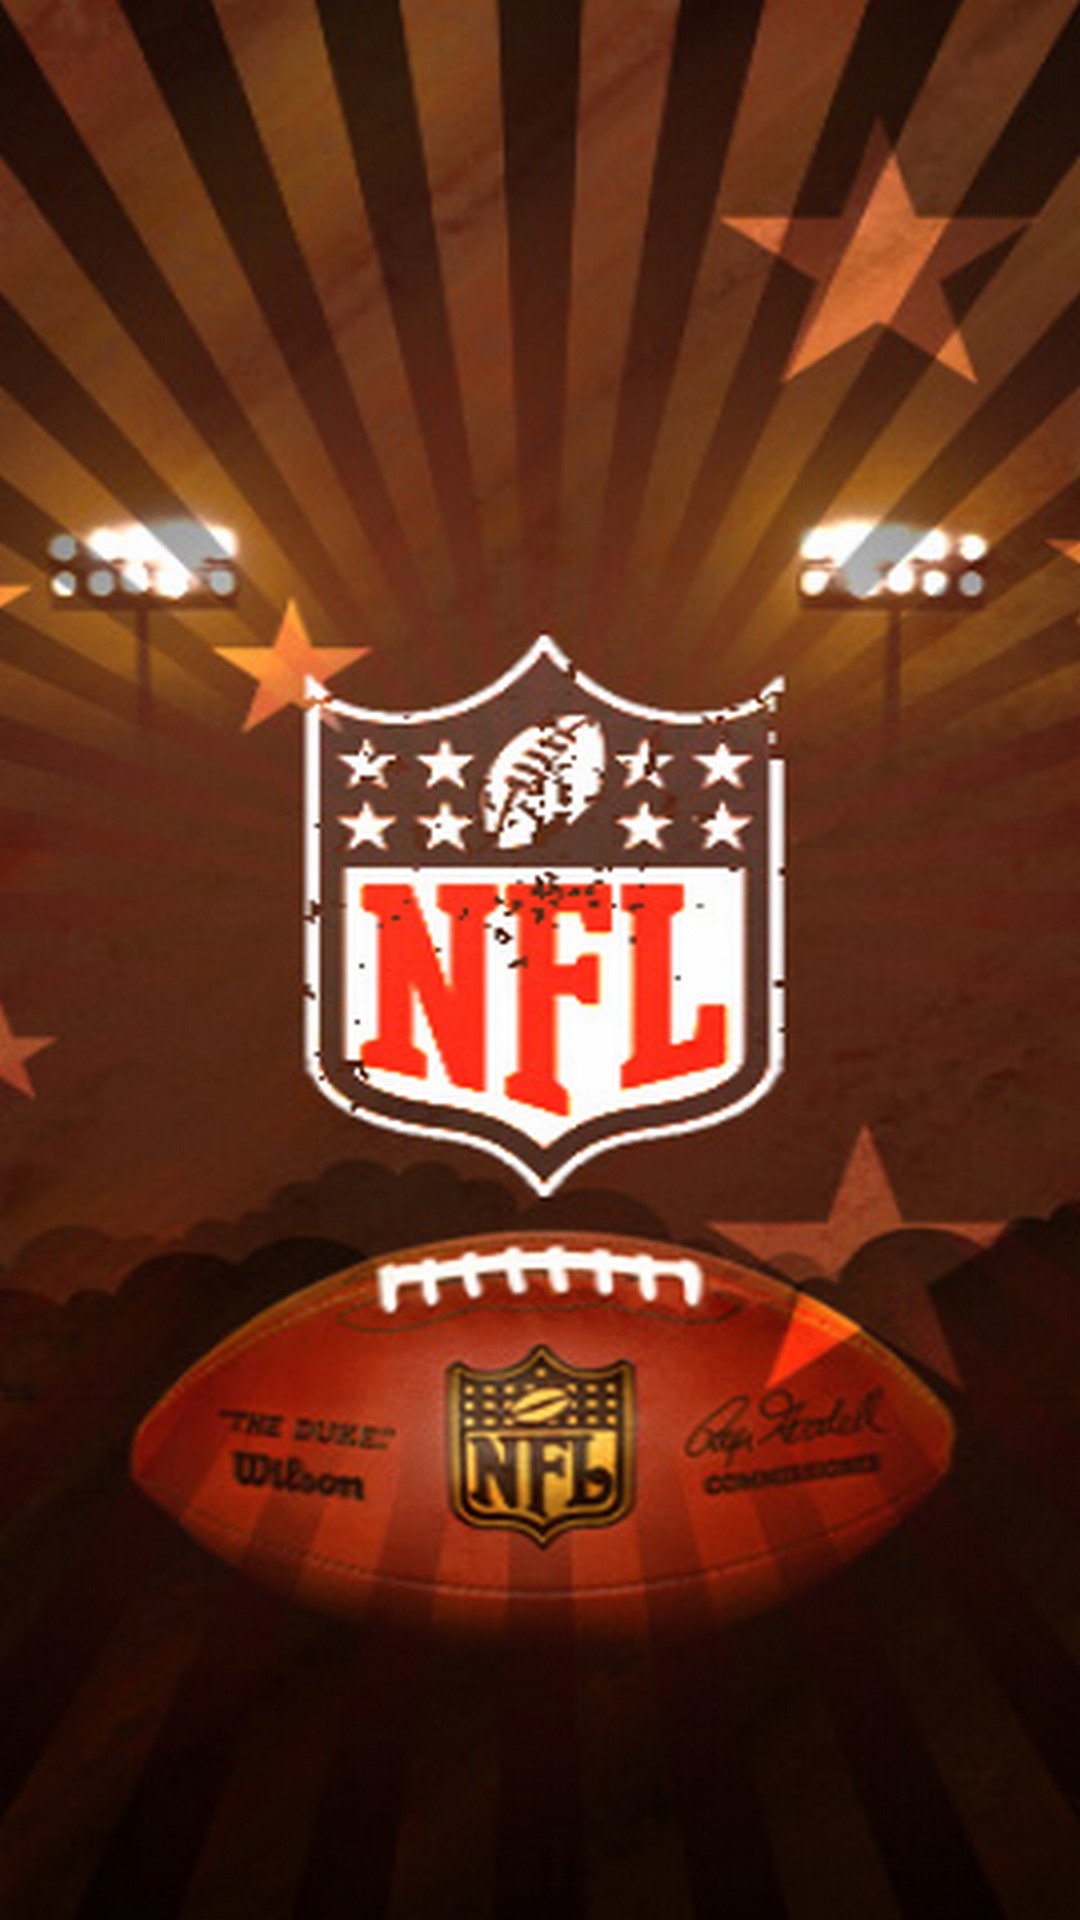 NFL iPhone Wallpaper HD With high-resolution 1080X1920 pixel. Download and set as wallpaper for Apple iPhone X, XS Max, XR, 8, 7, 6, SE, iPad, Android